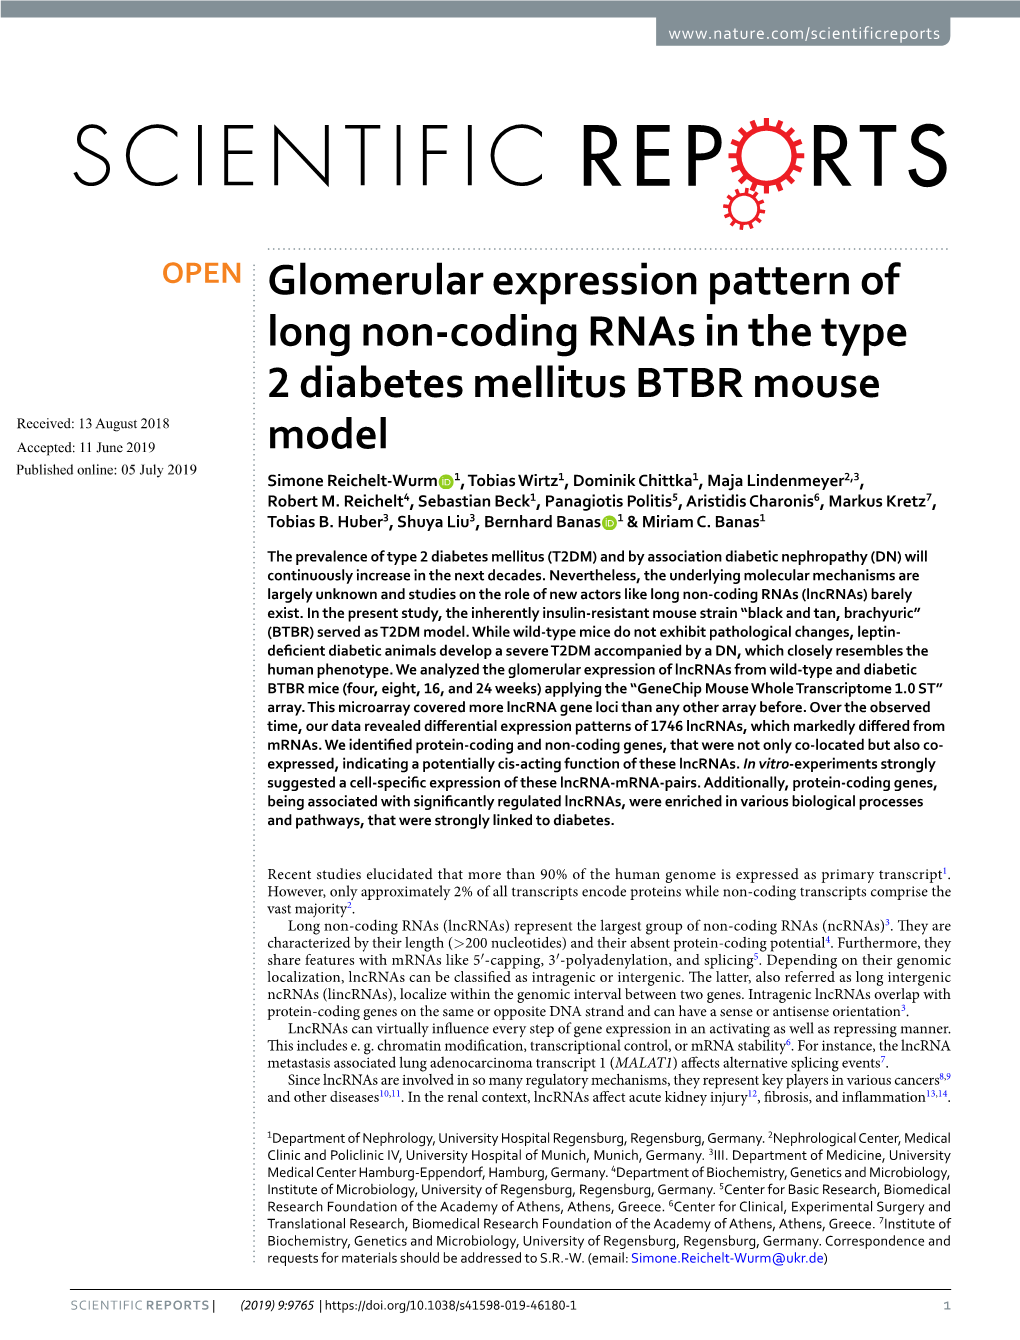 Glomerular Expression Pattern of Long Non-Coding Rnas in the Type 2